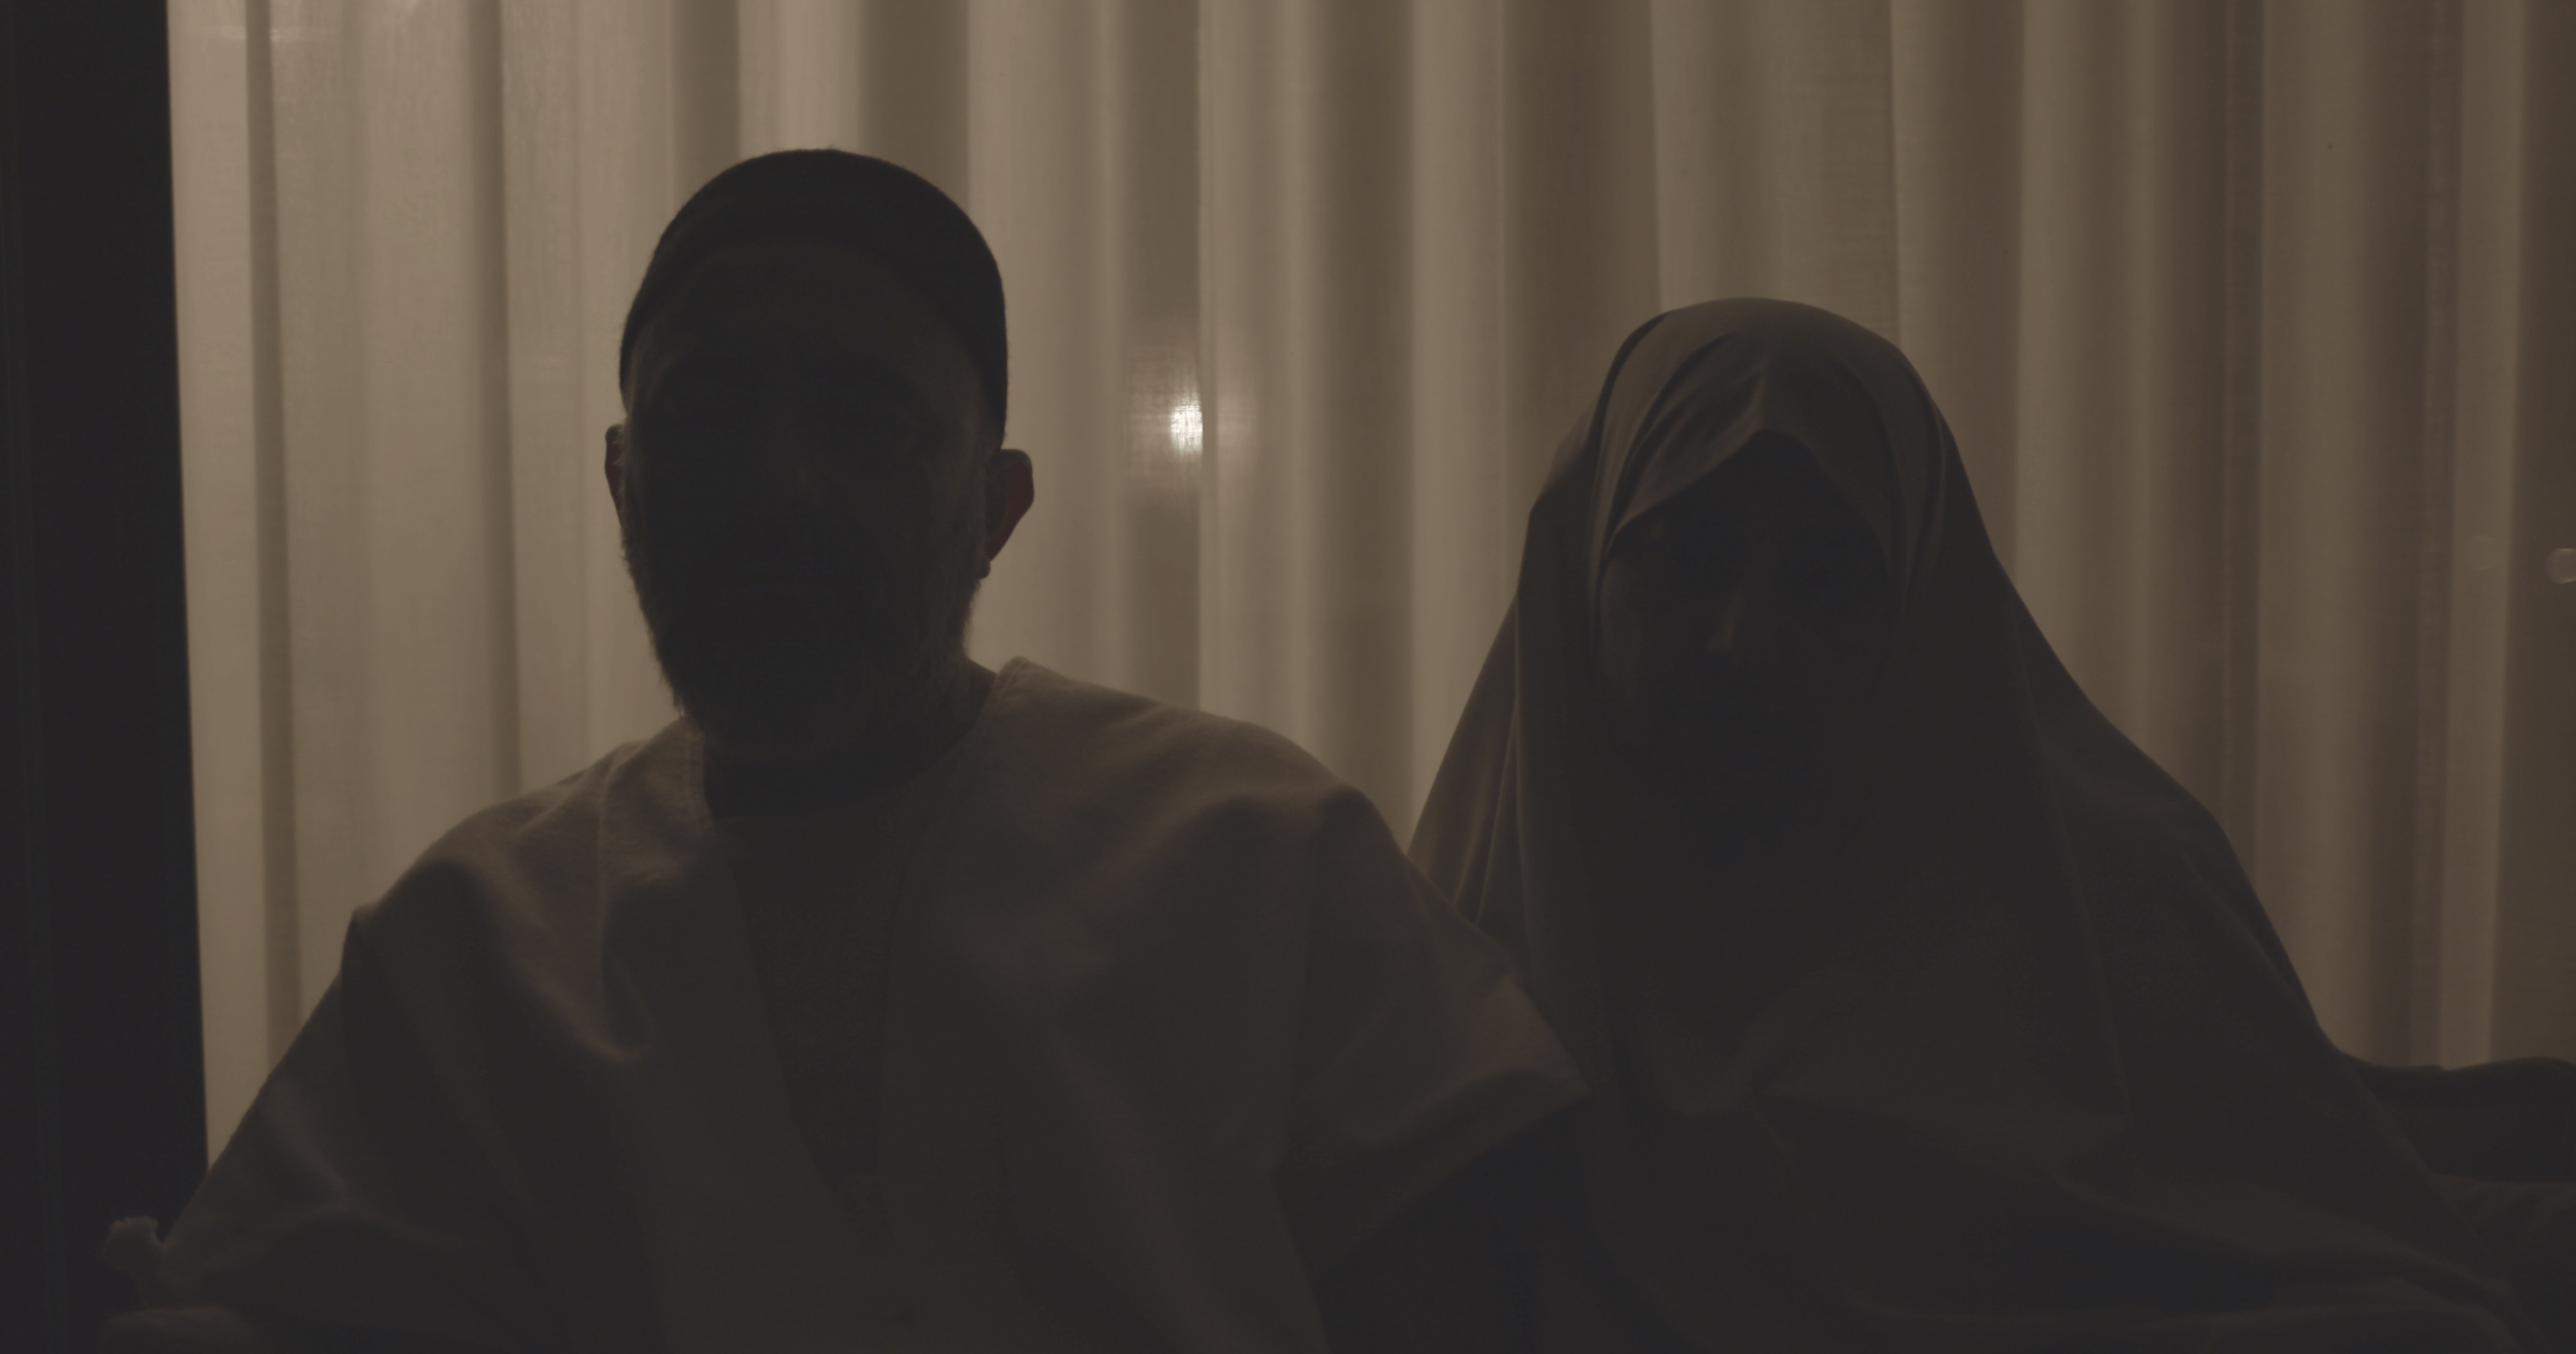 Still from Q. Two people in darkness, they are backlit. One person is wearing a hijab.